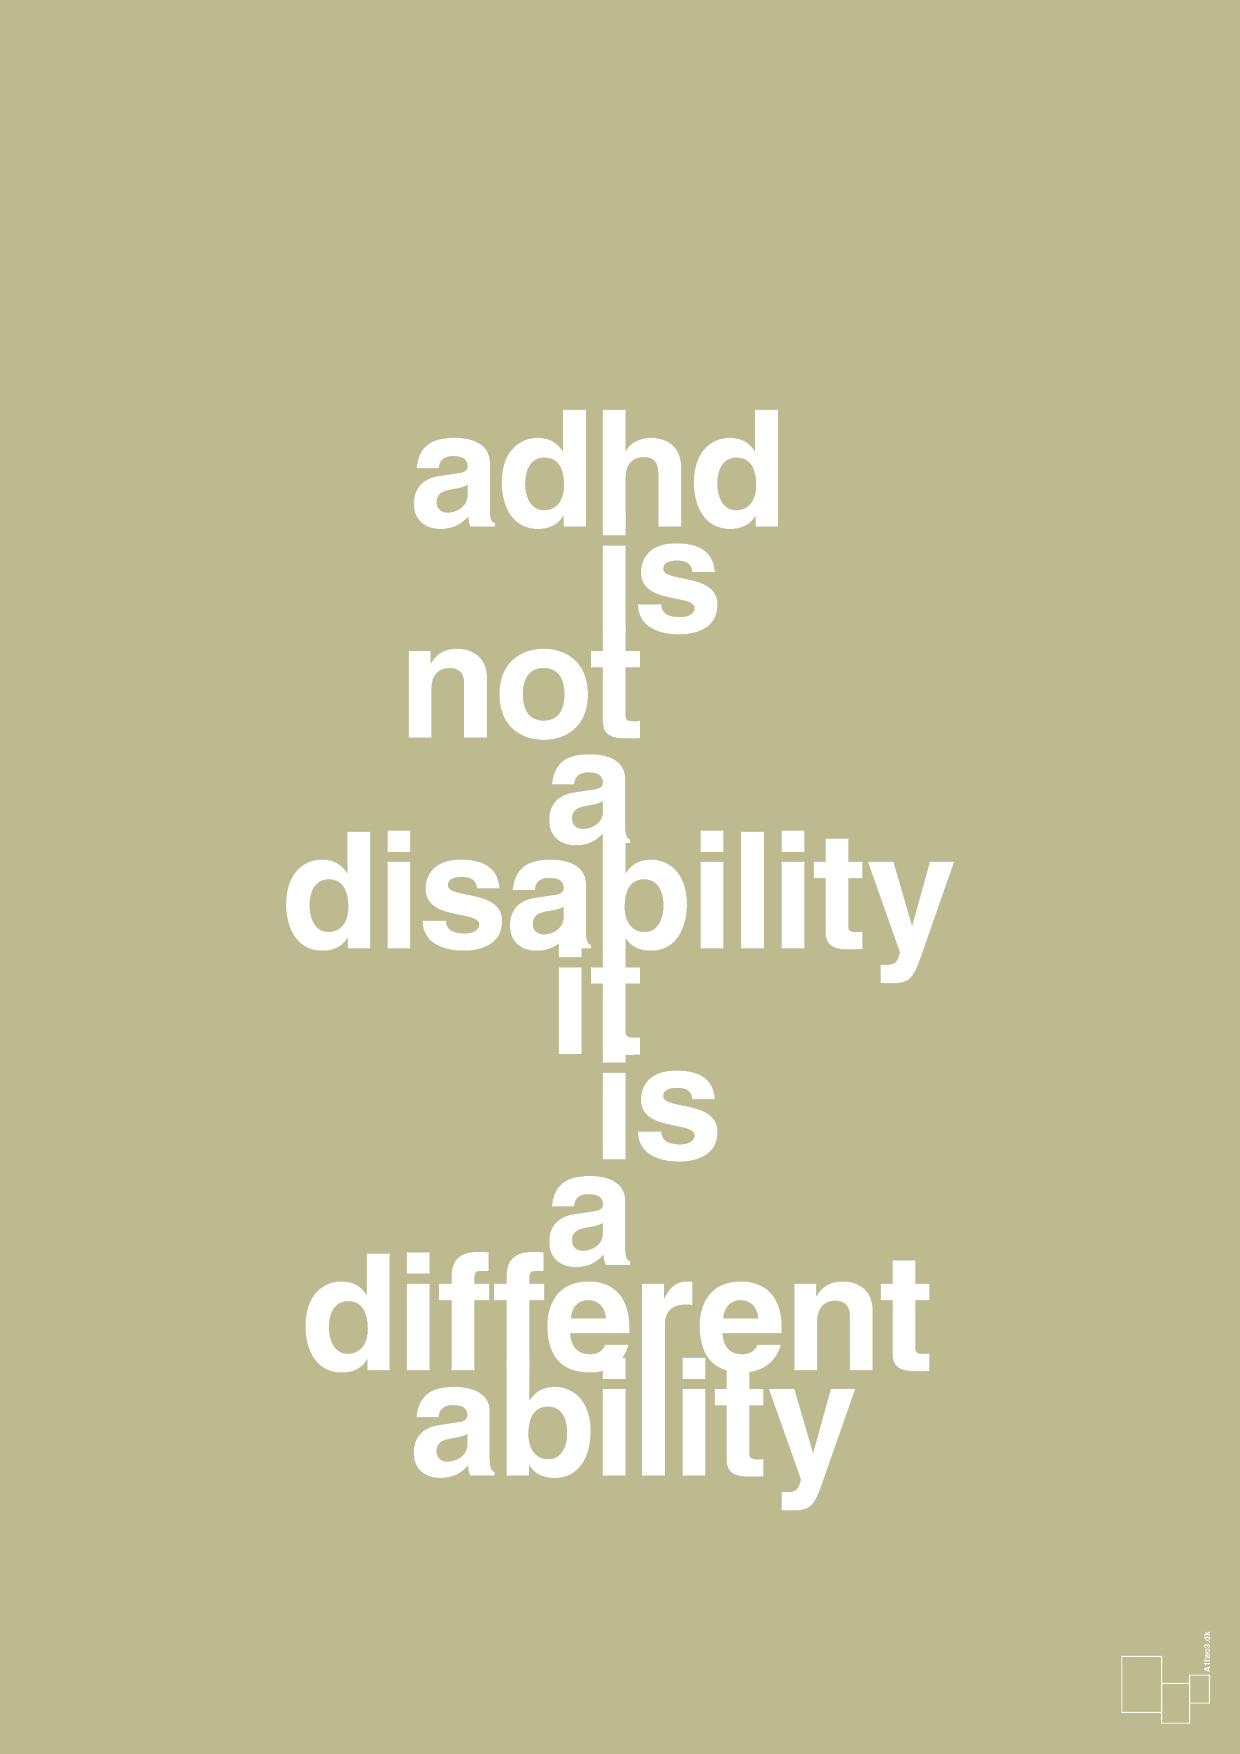 adhd is not a disability it is a different ability - Plakat med Samfund i Back to Nature